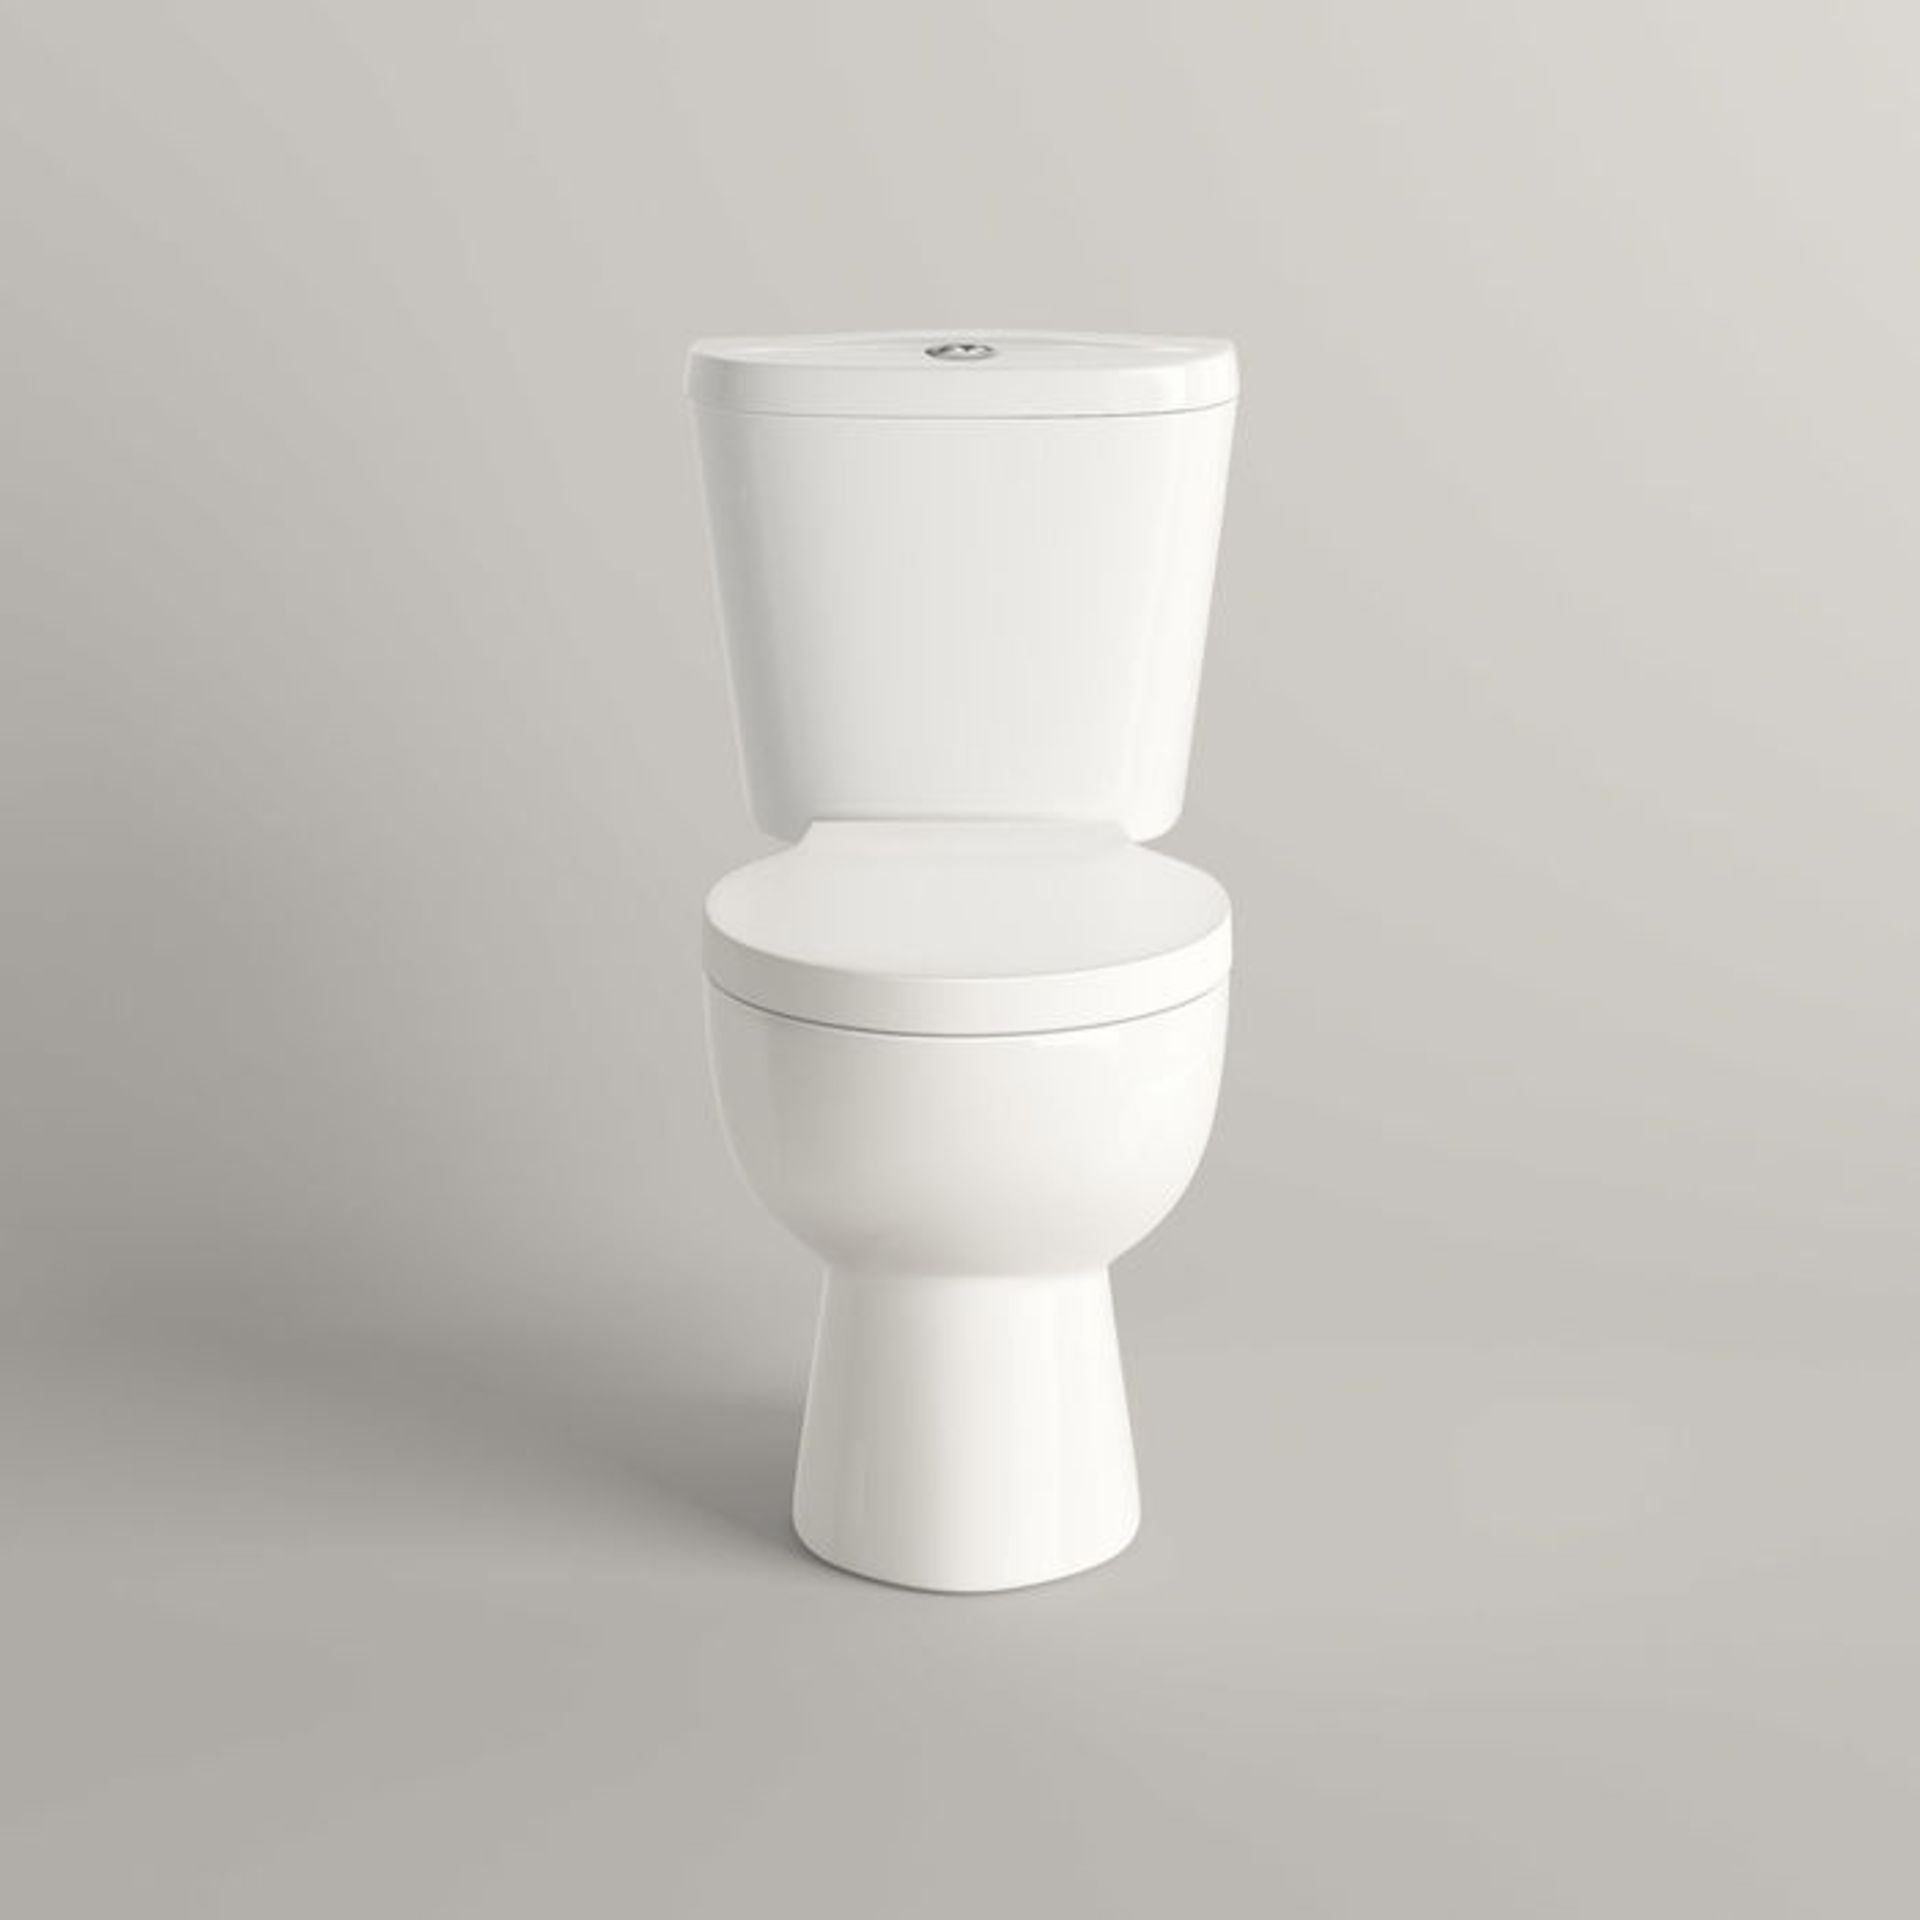 (NV65) Quartz Close Coupled Toilet.. We love this because it is simply great value! Made from W... - Image 3 of 3